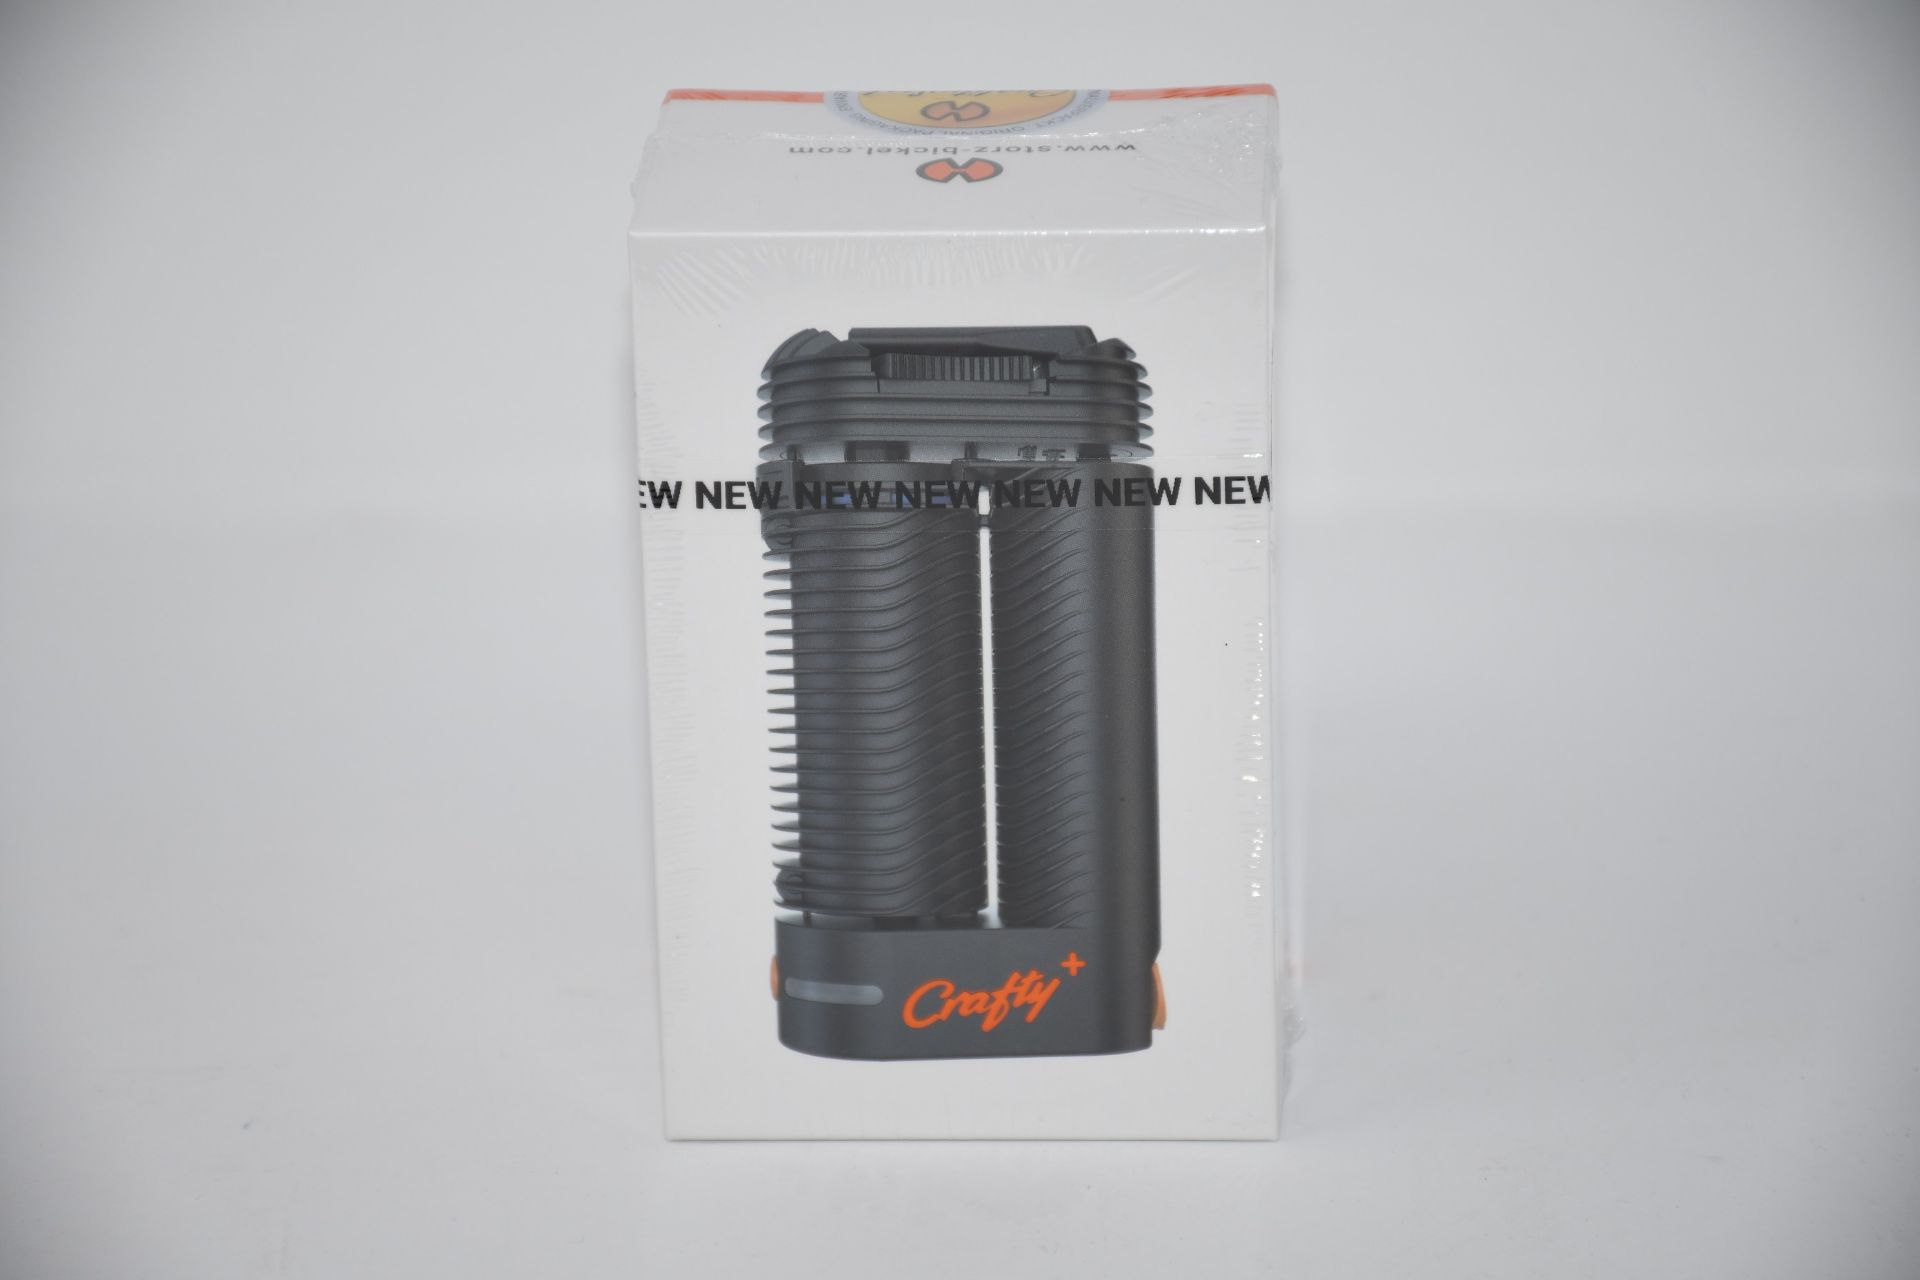 One boxed as new Storz & Bickel Crafty Plus Vaporizer.